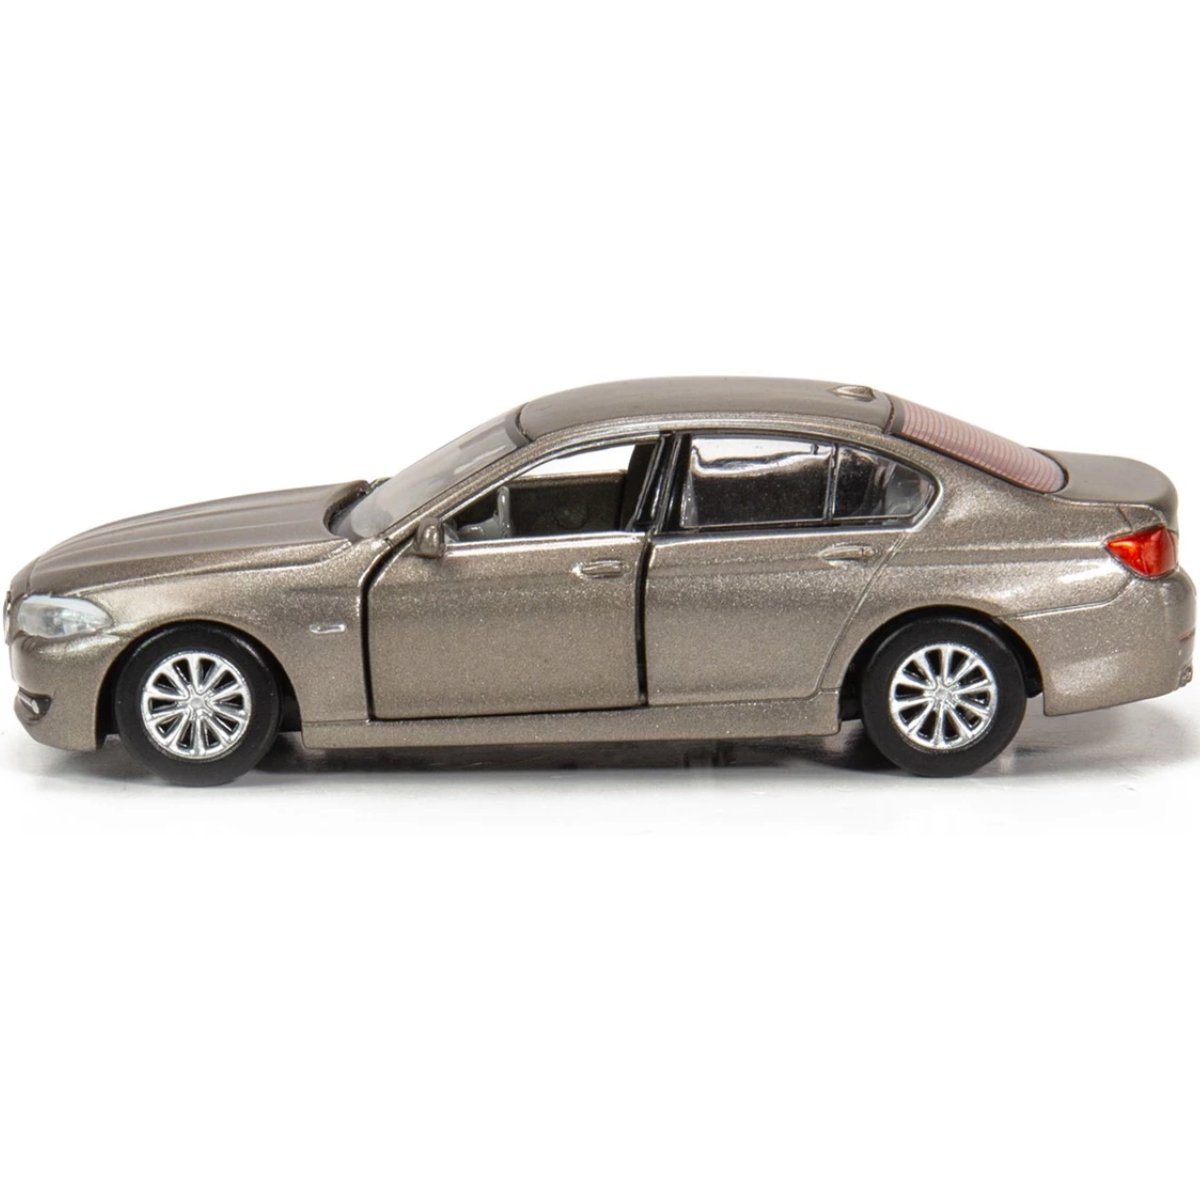 Tiny Models BMW 5 Series F10 Gold (1:64 Scale) - Phillips Hobbies